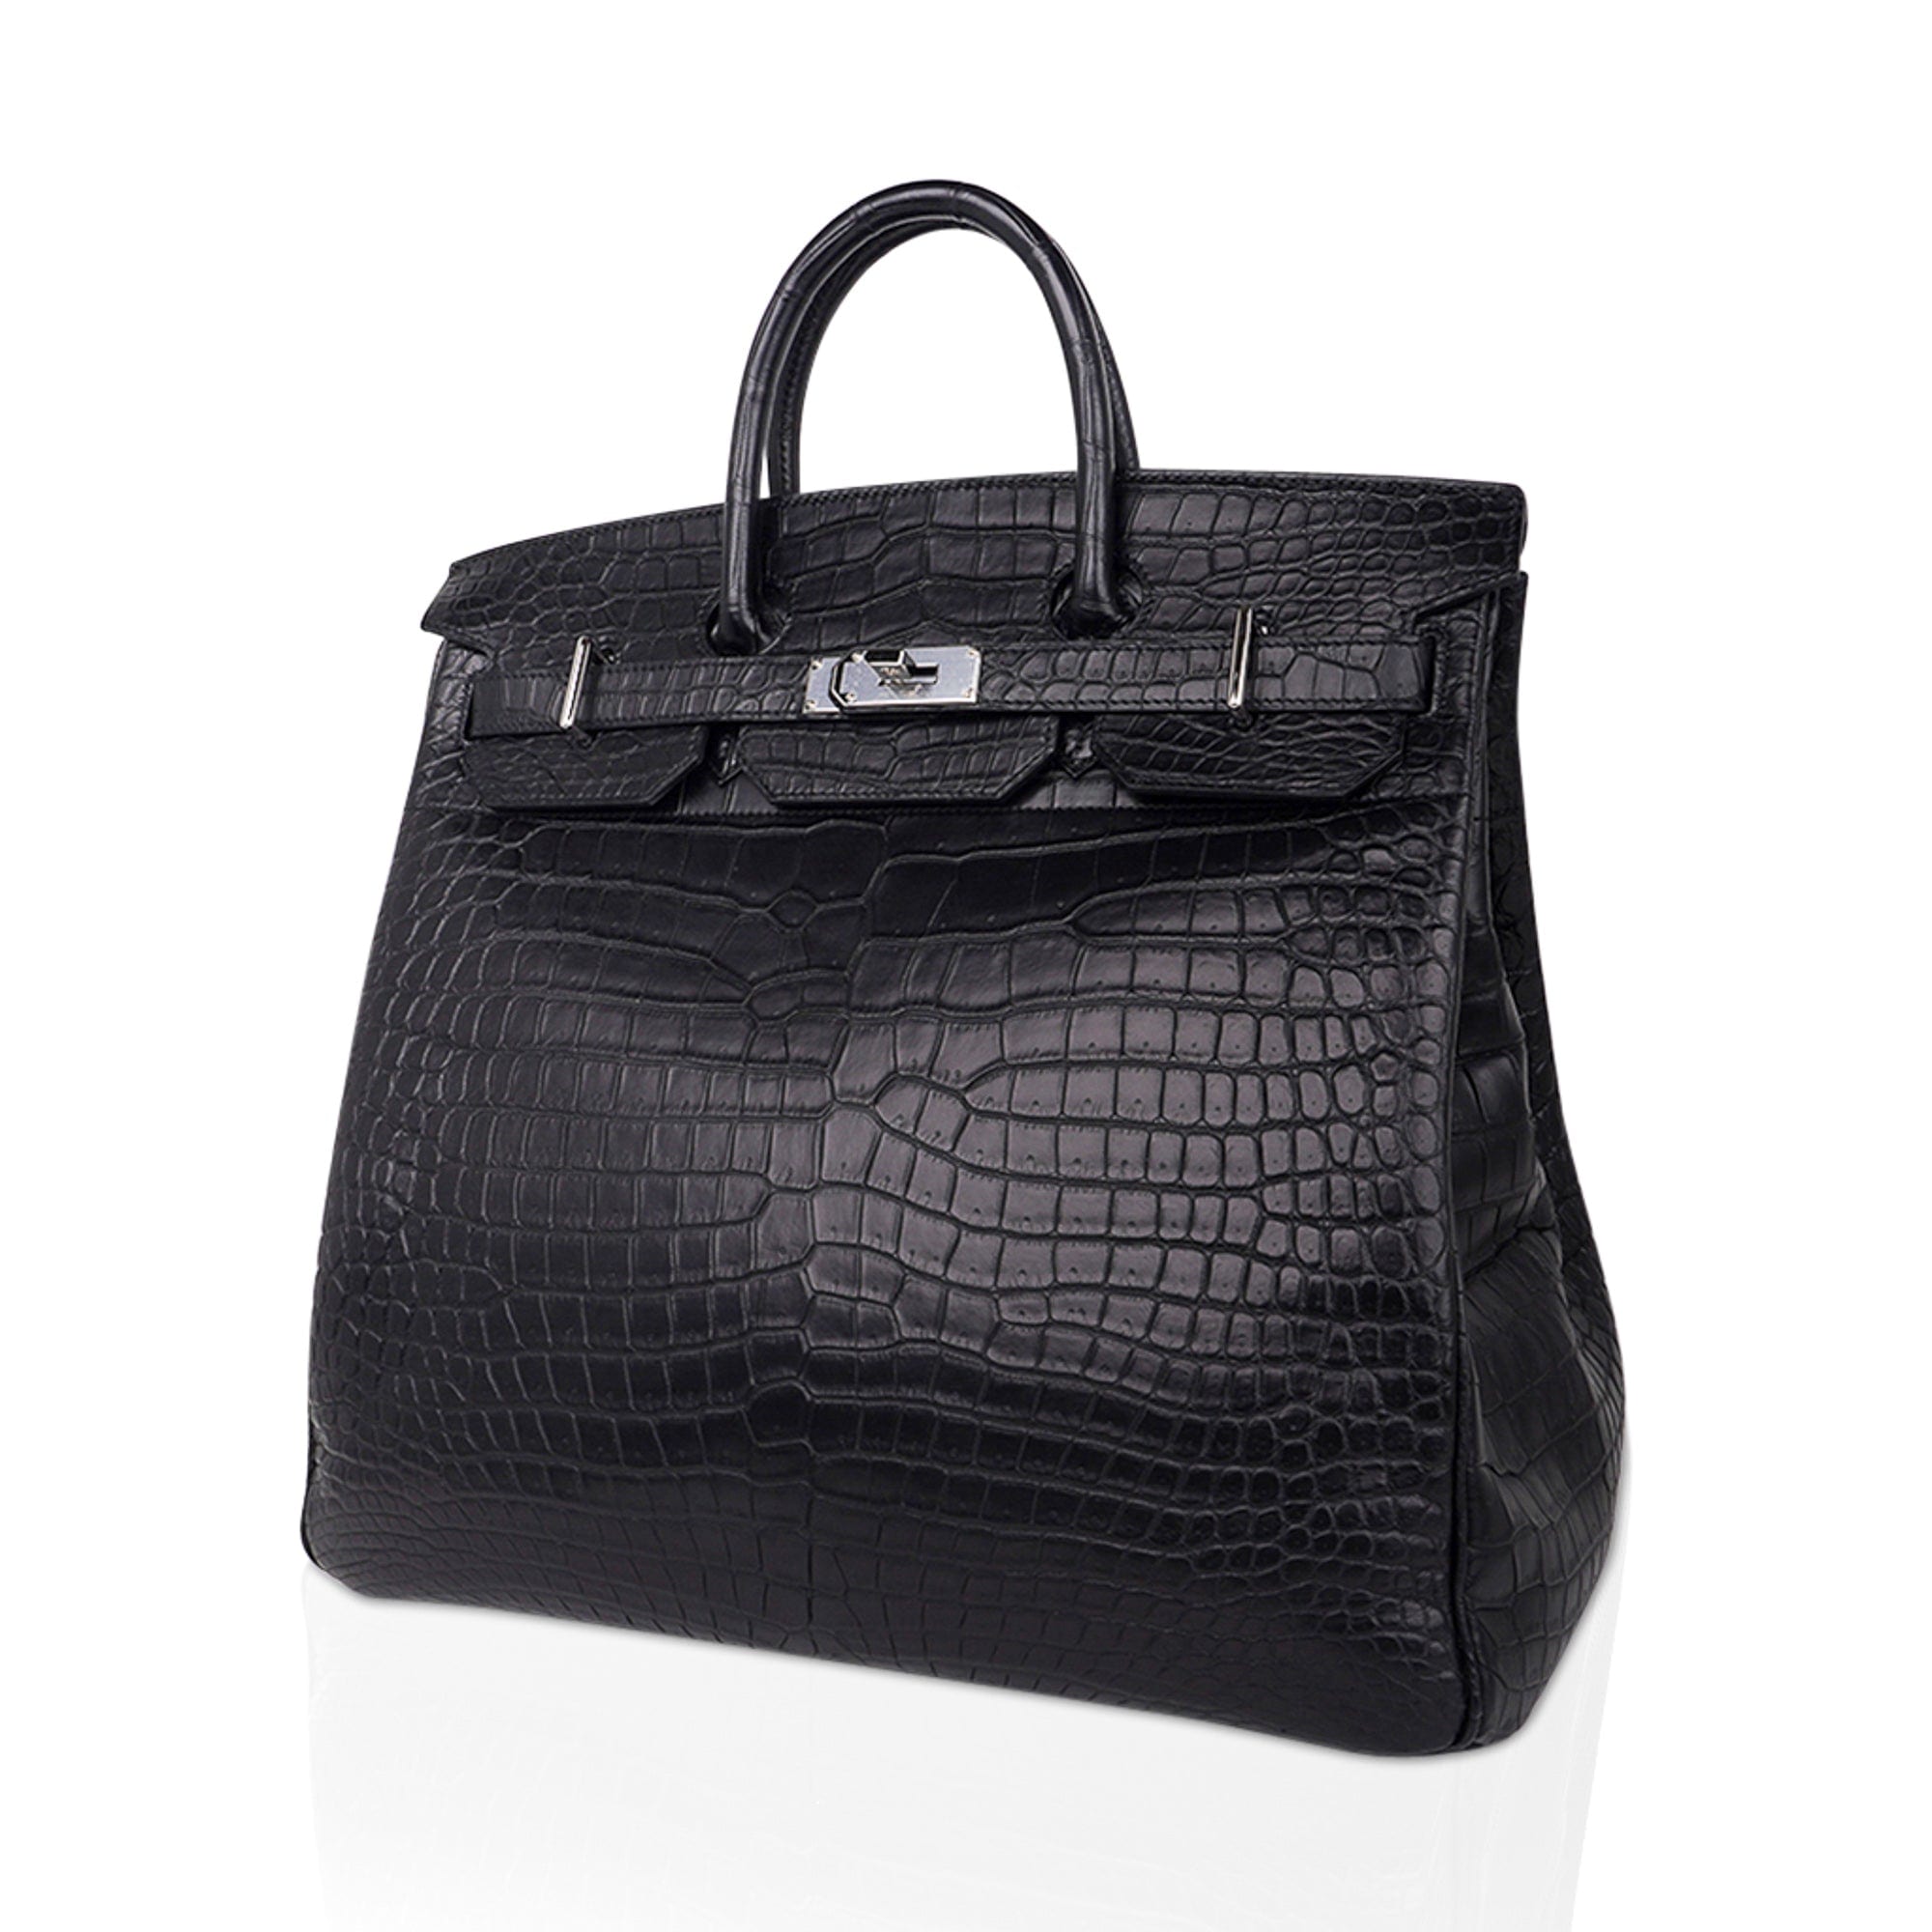 What to Expect when Buying Limited Edition Hermès Birkin & Kelly Bags, Handbags and Accessories